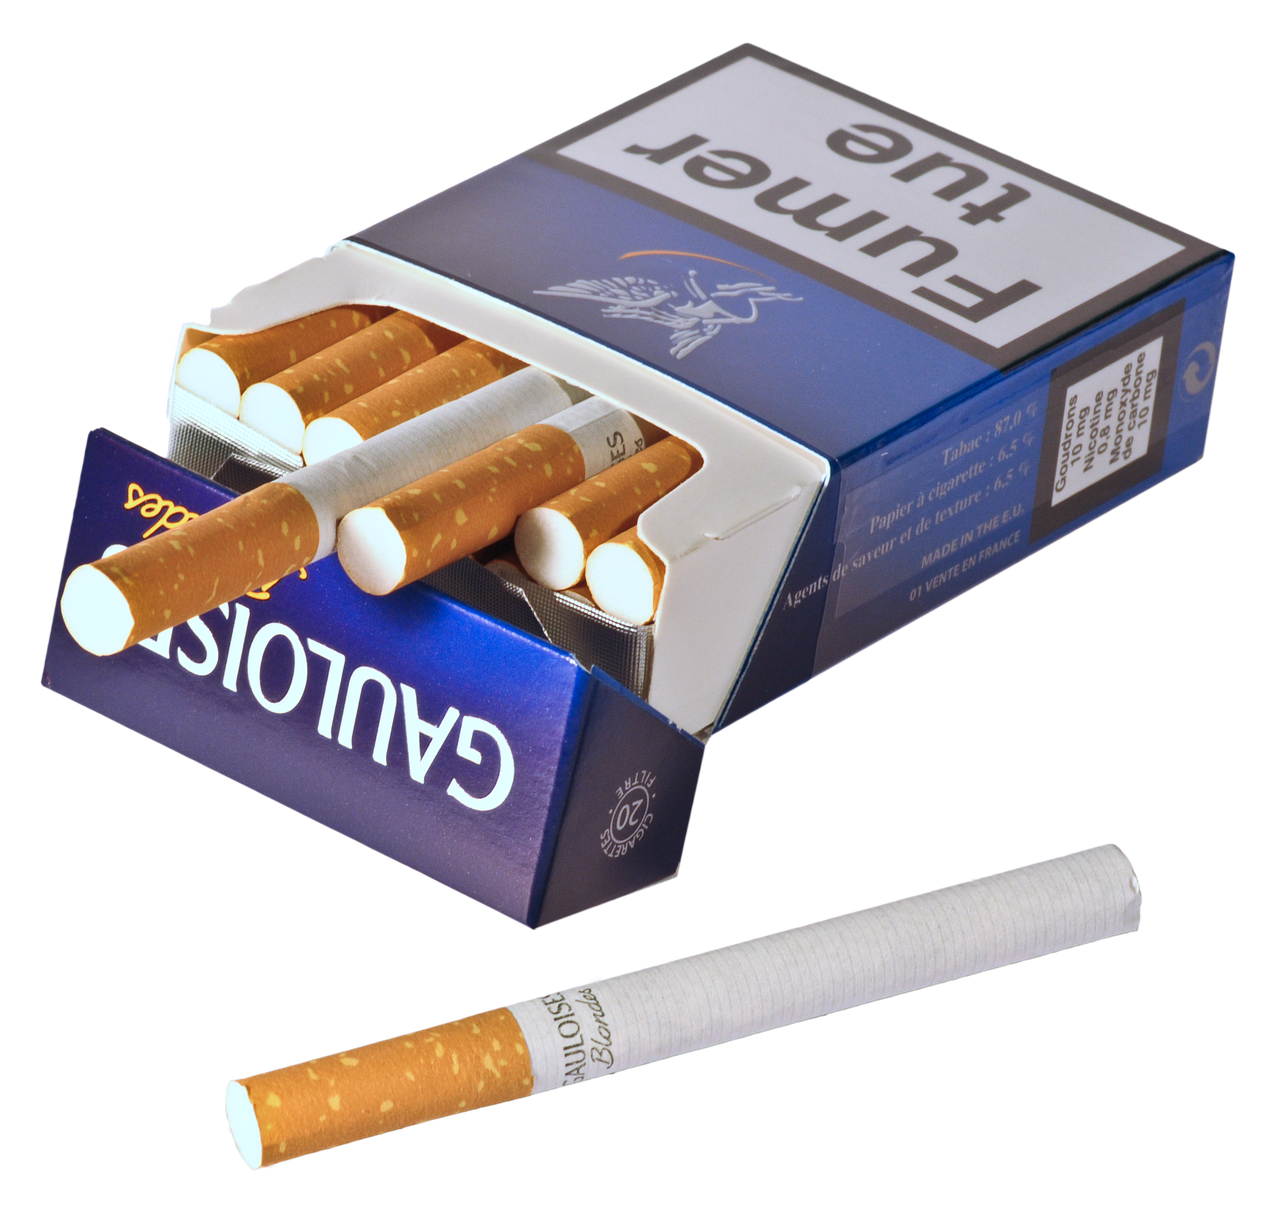 cigarette package tobacco free photo